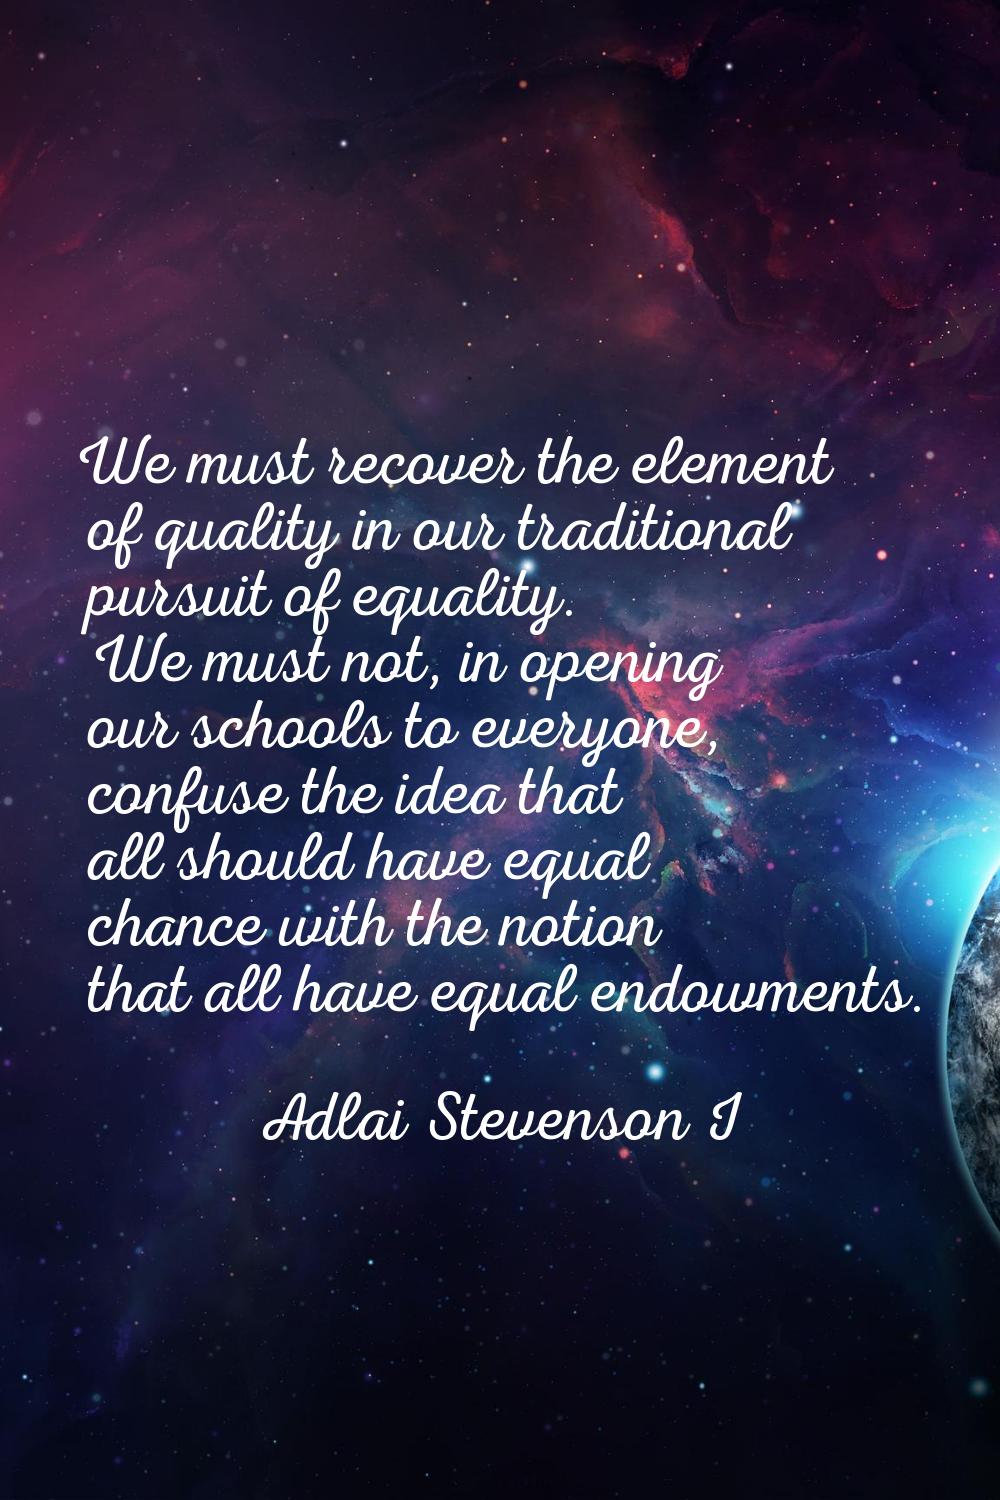 We must recover the element of quality in our traditional pursuit of equality. We must not, in open